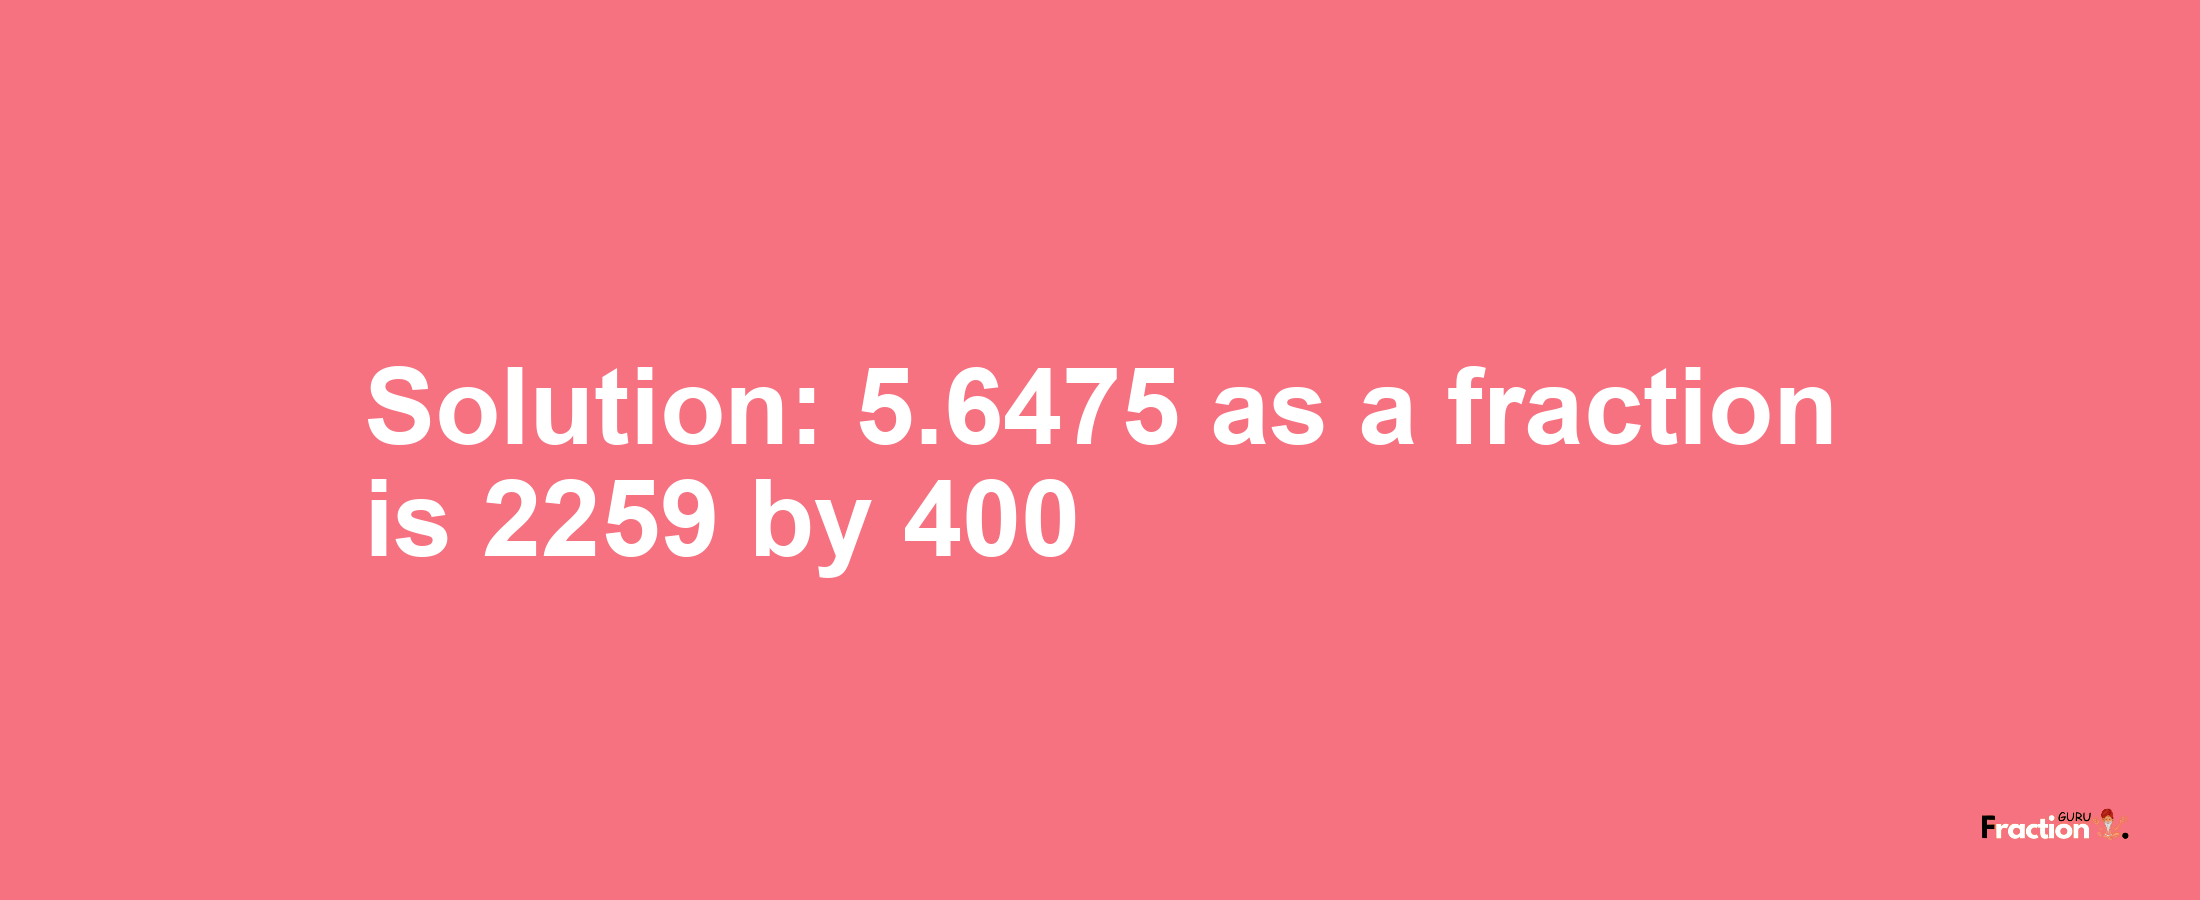 Solution:5.6475 as a fraction is 2259/400